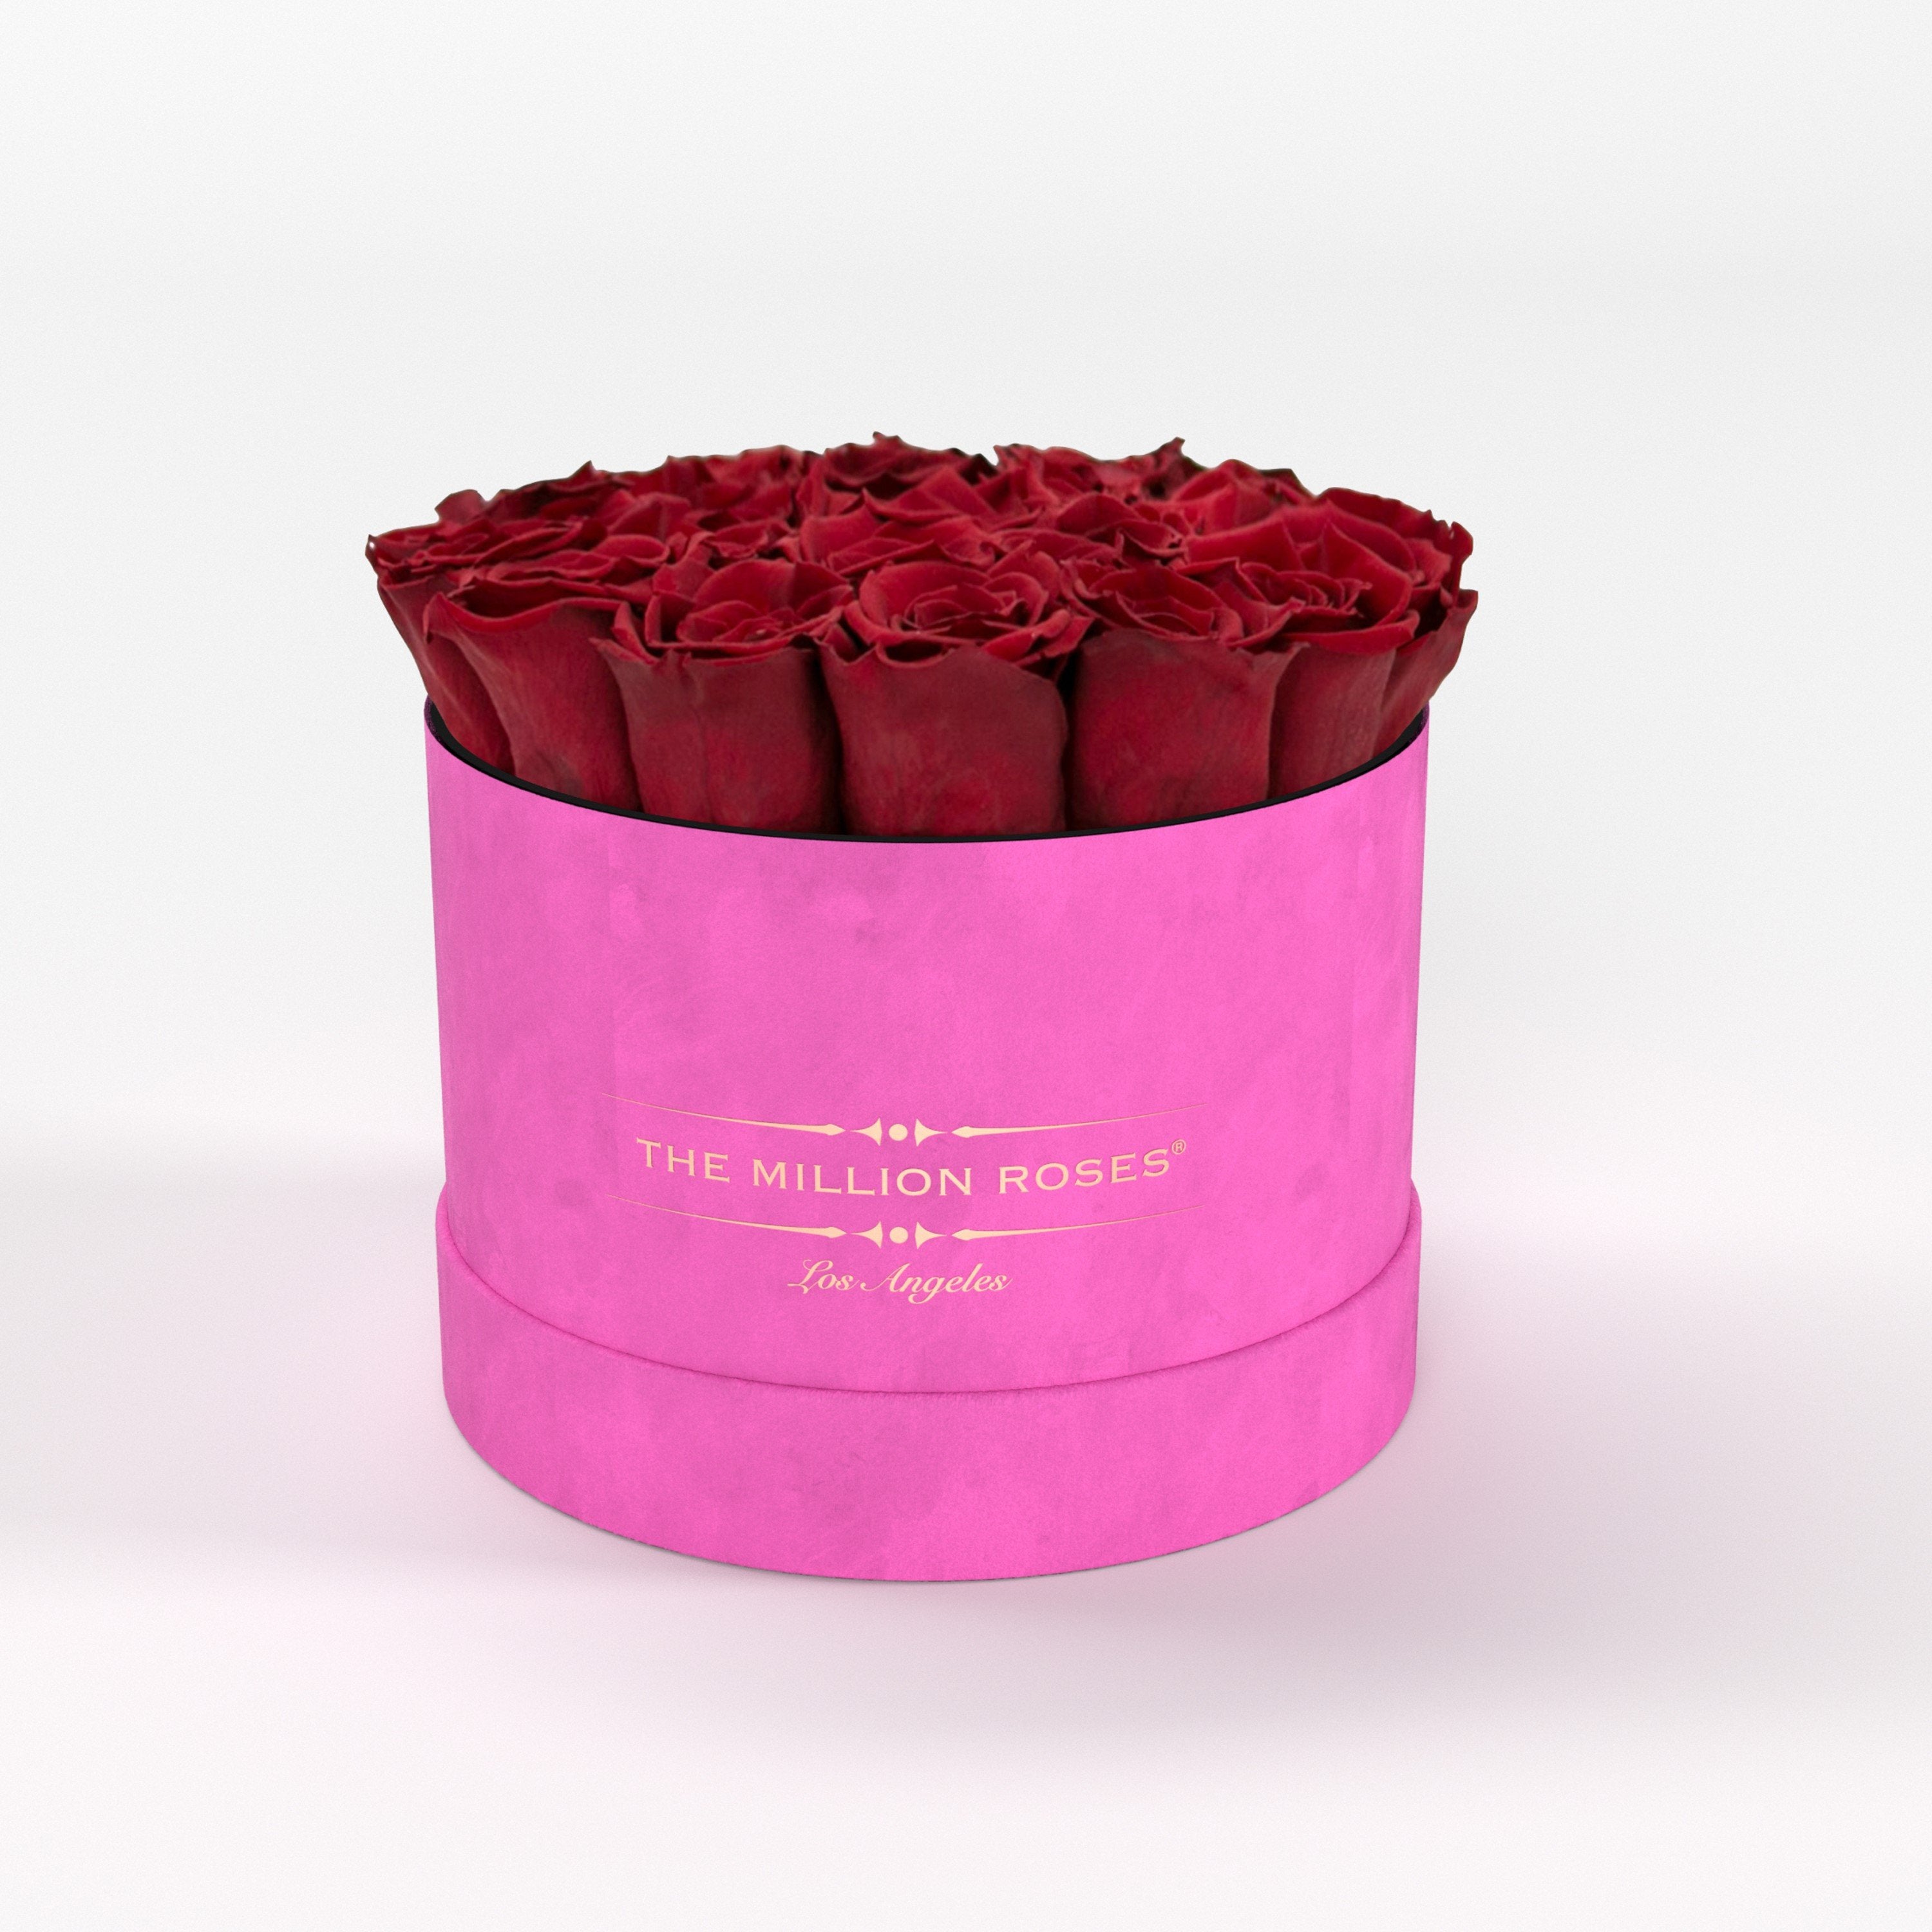 ( LA ) Hot Pink - Suede - Classic Box with Red Roses Kit - the million roses